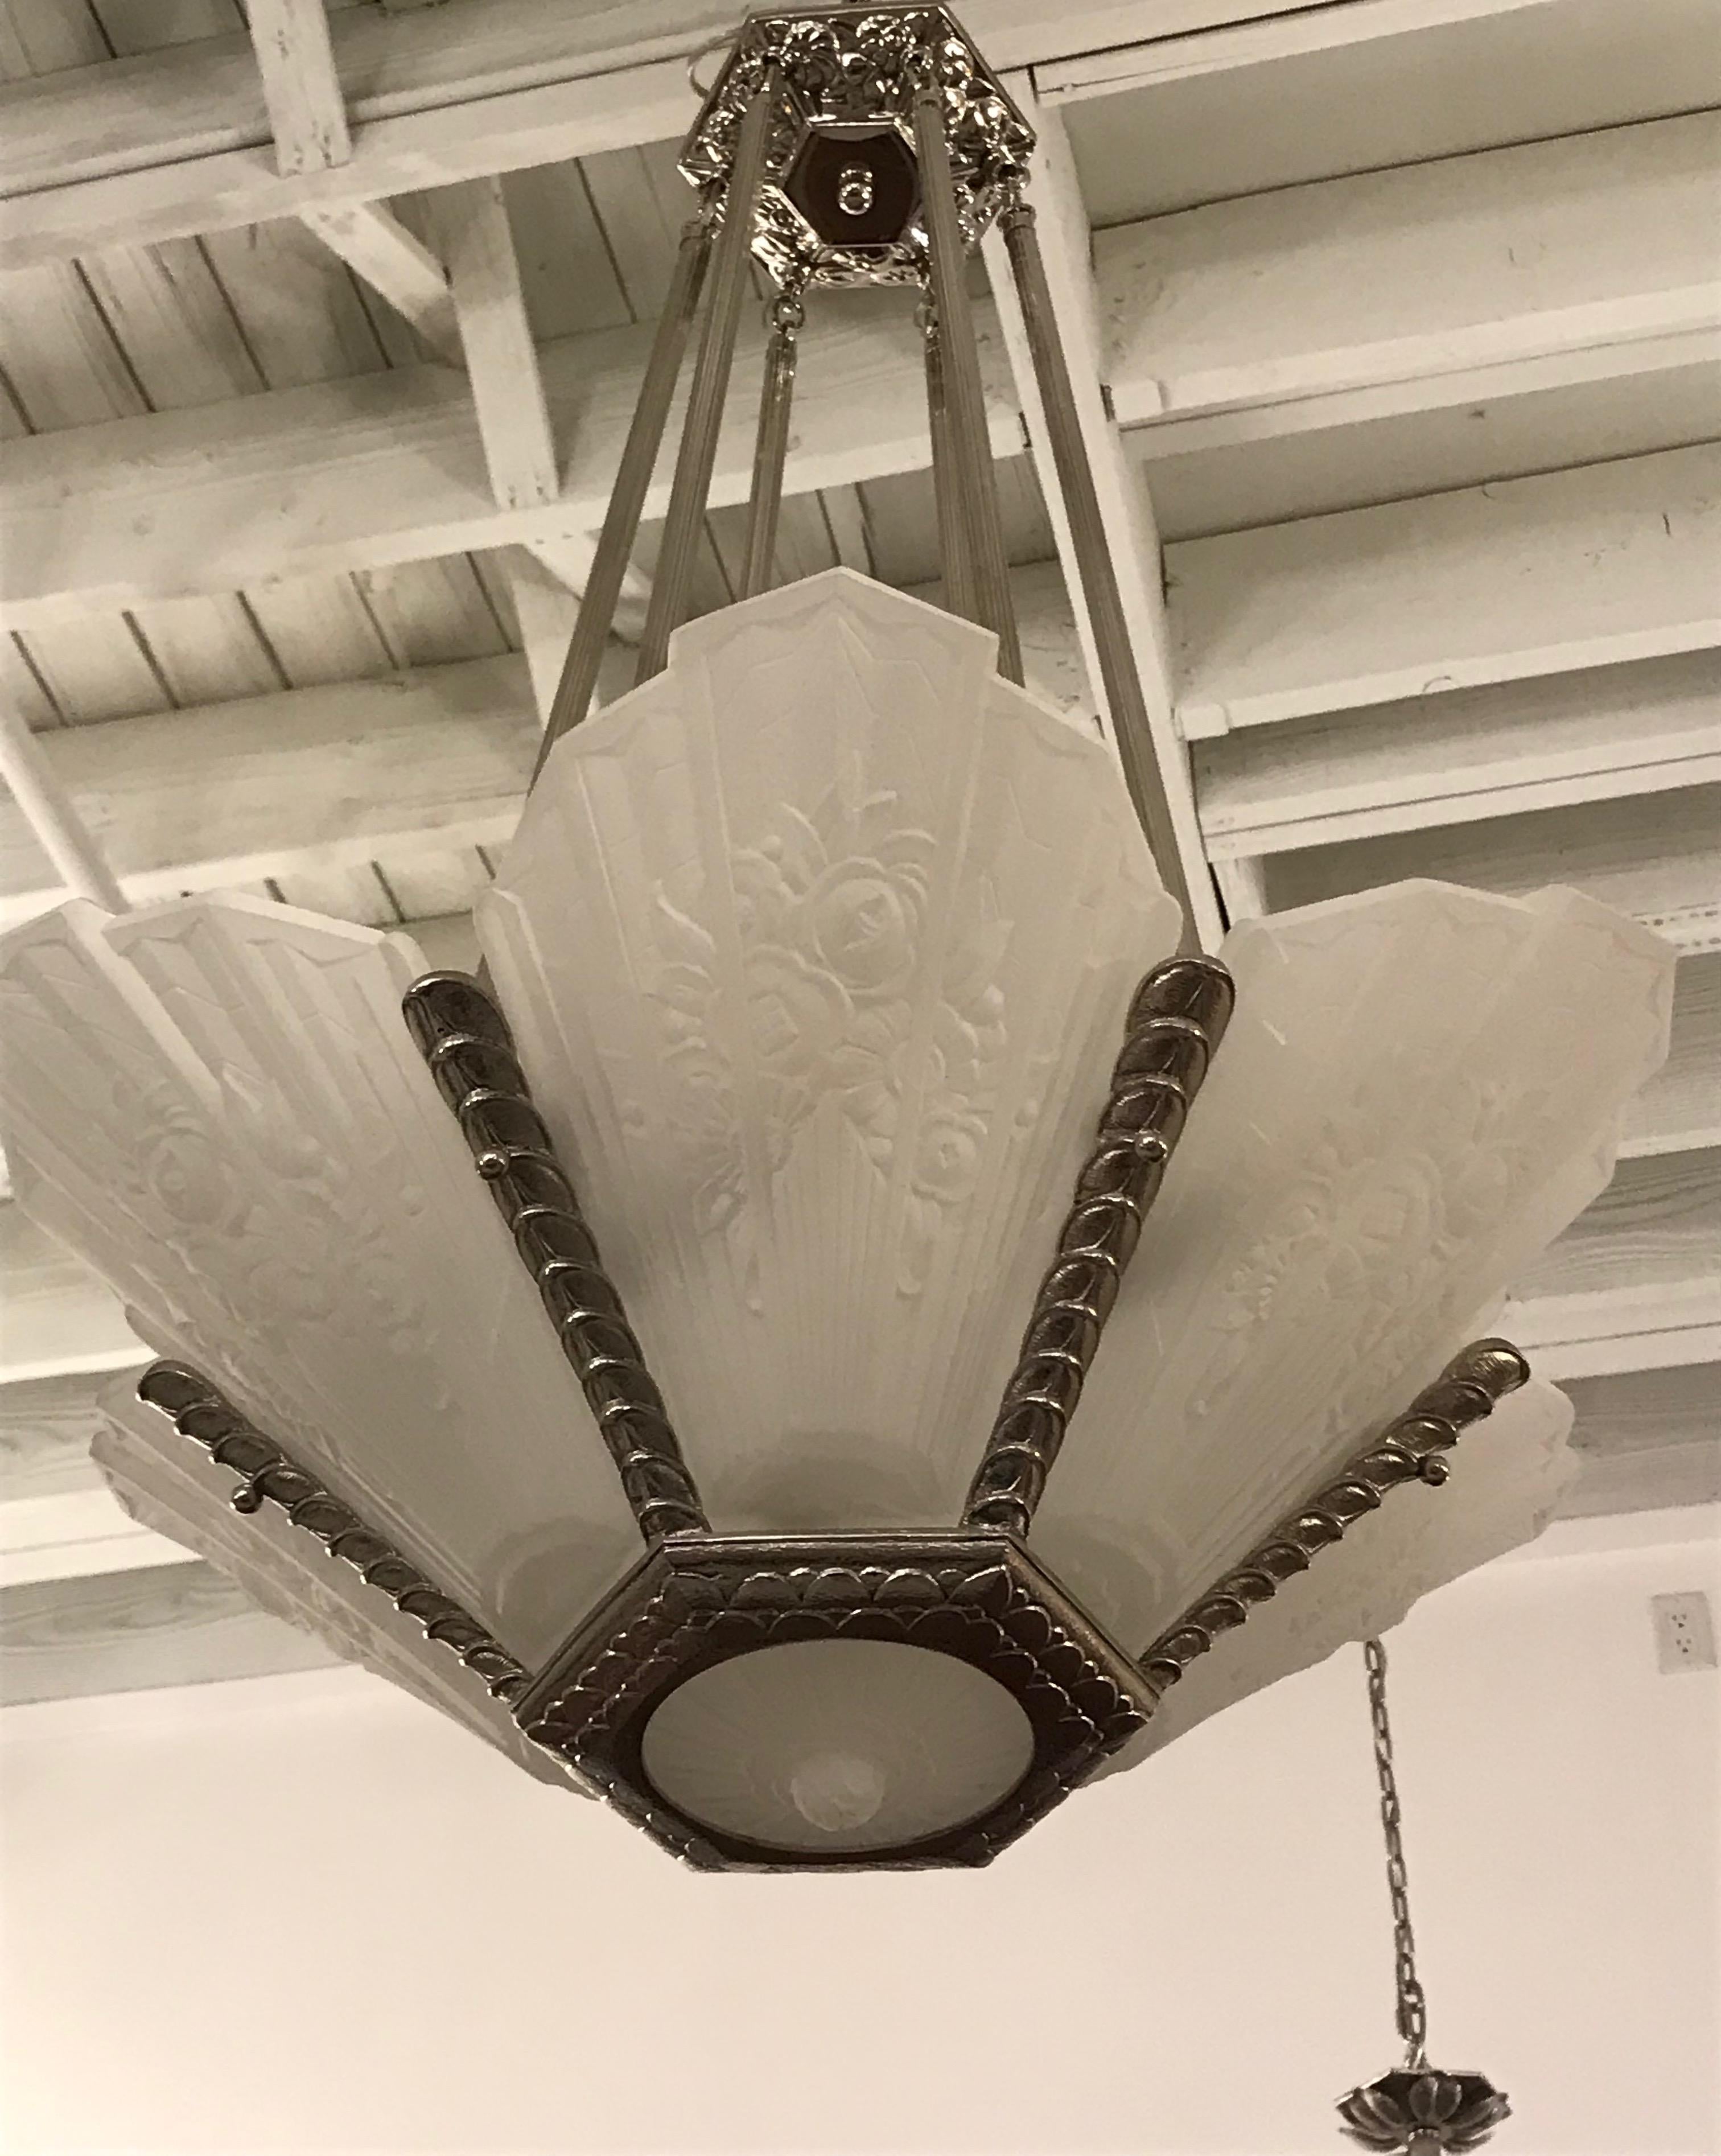 Gorgeous French Art Deco chandelier signed by Des Hanots. With six frosted panels and beautiful center bowl having floral motif. Held by polished nickel geometric design frame. Ceiling cap has beautiful floral design motif. Has been rewired for